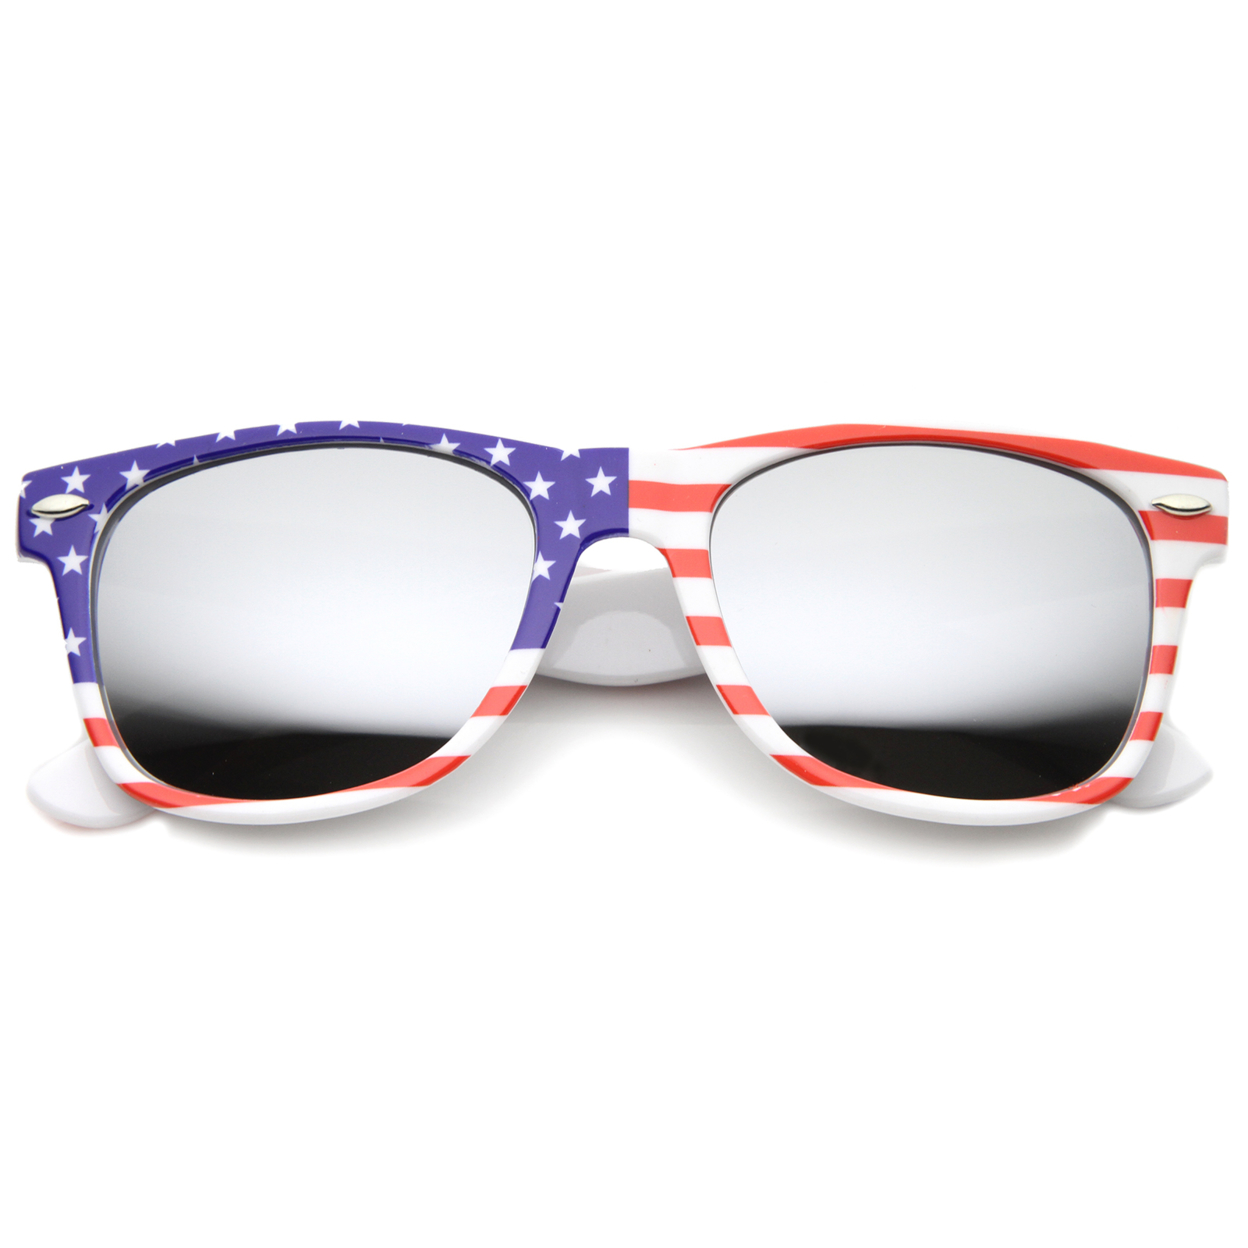 Mens Horn Rimmed Sunglasses With UV400 Protected Mirrored Lens 9960 - American Flag / Fire